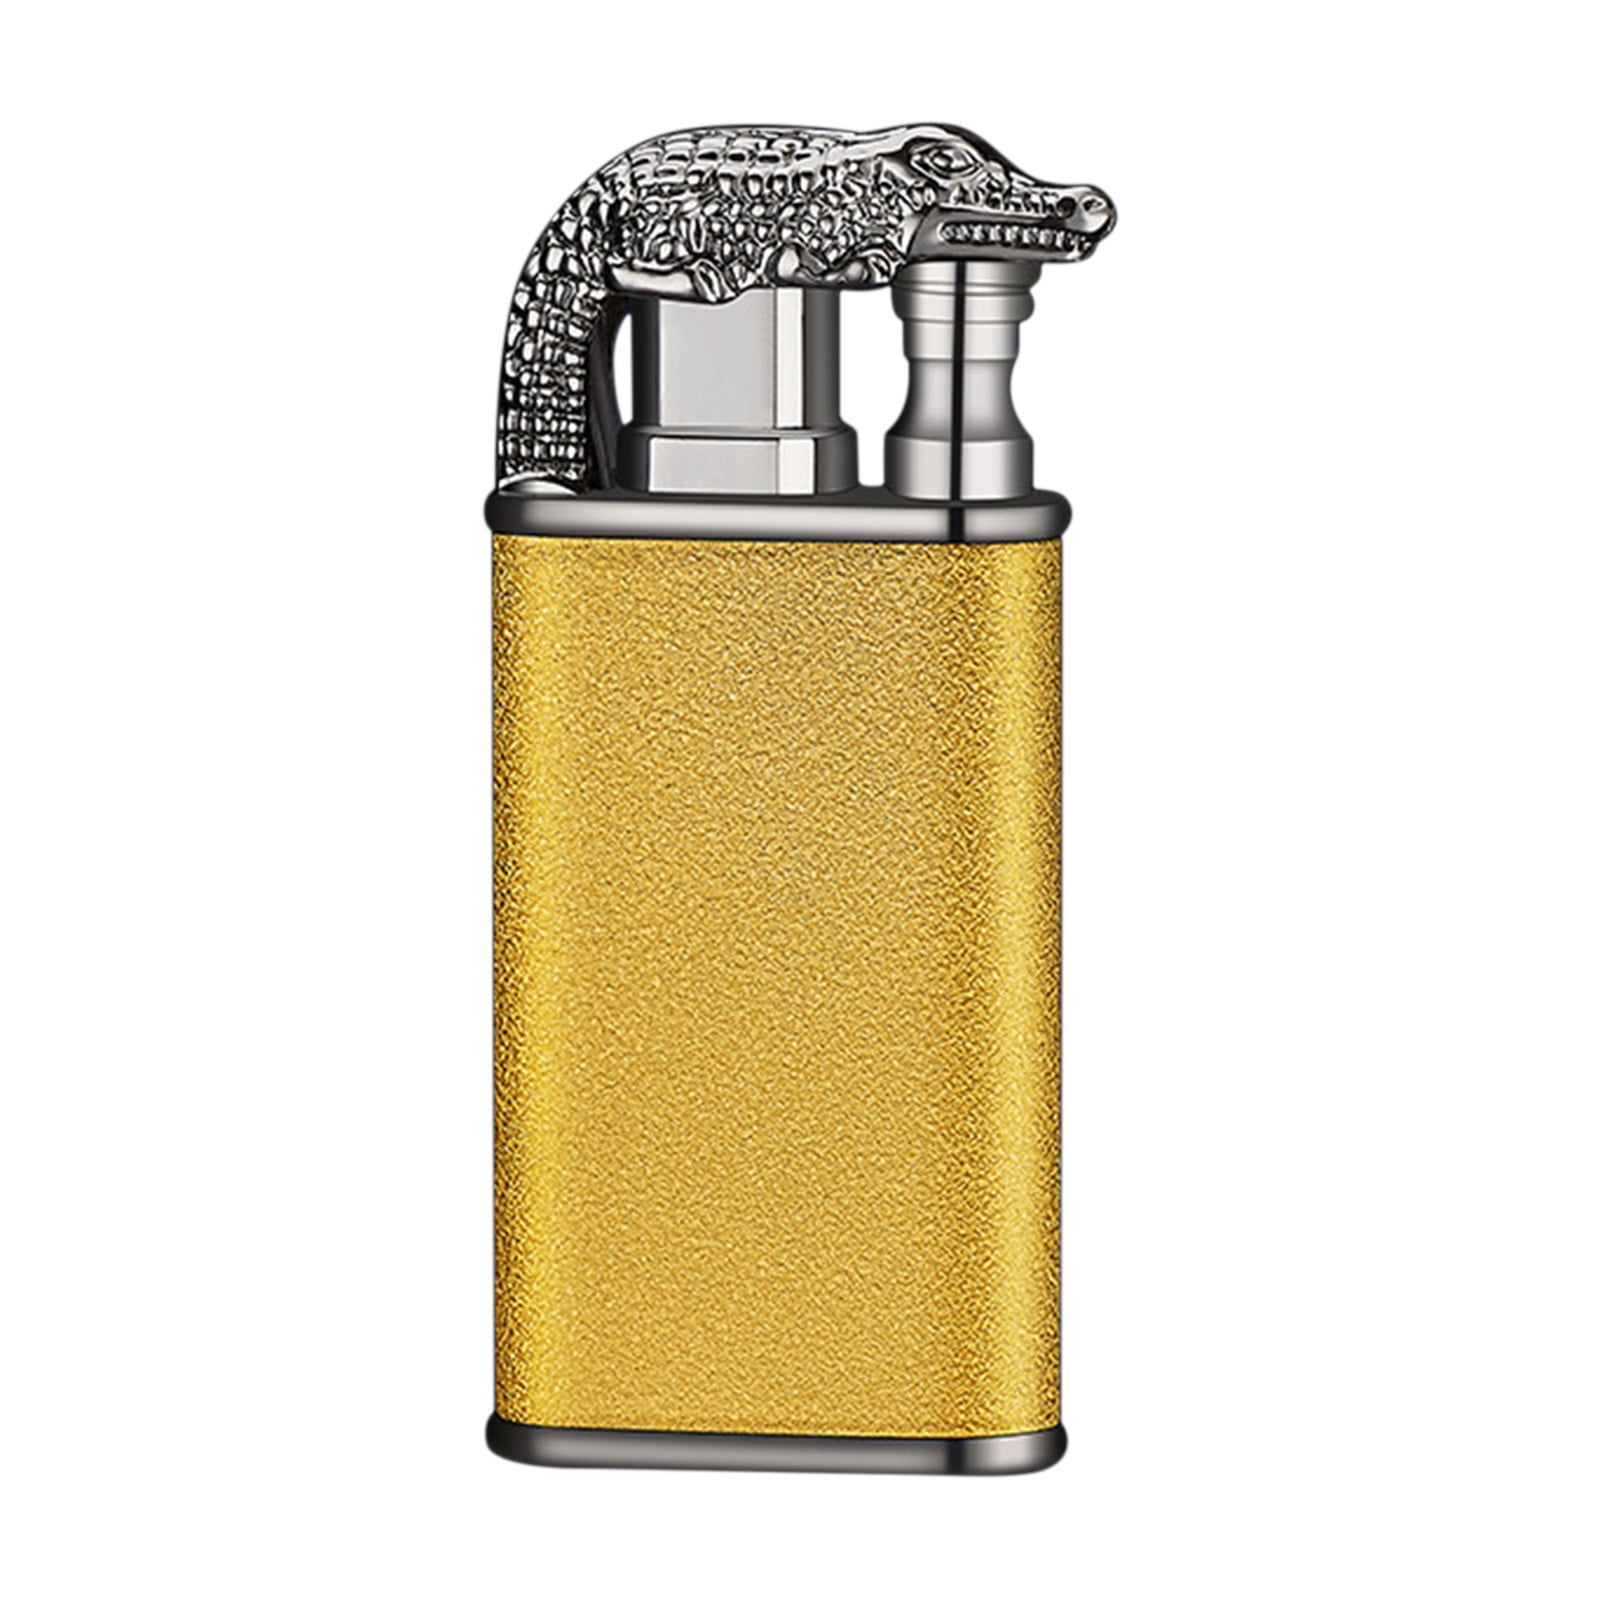  Retro Lighters, Windproof Lighters Straight to The